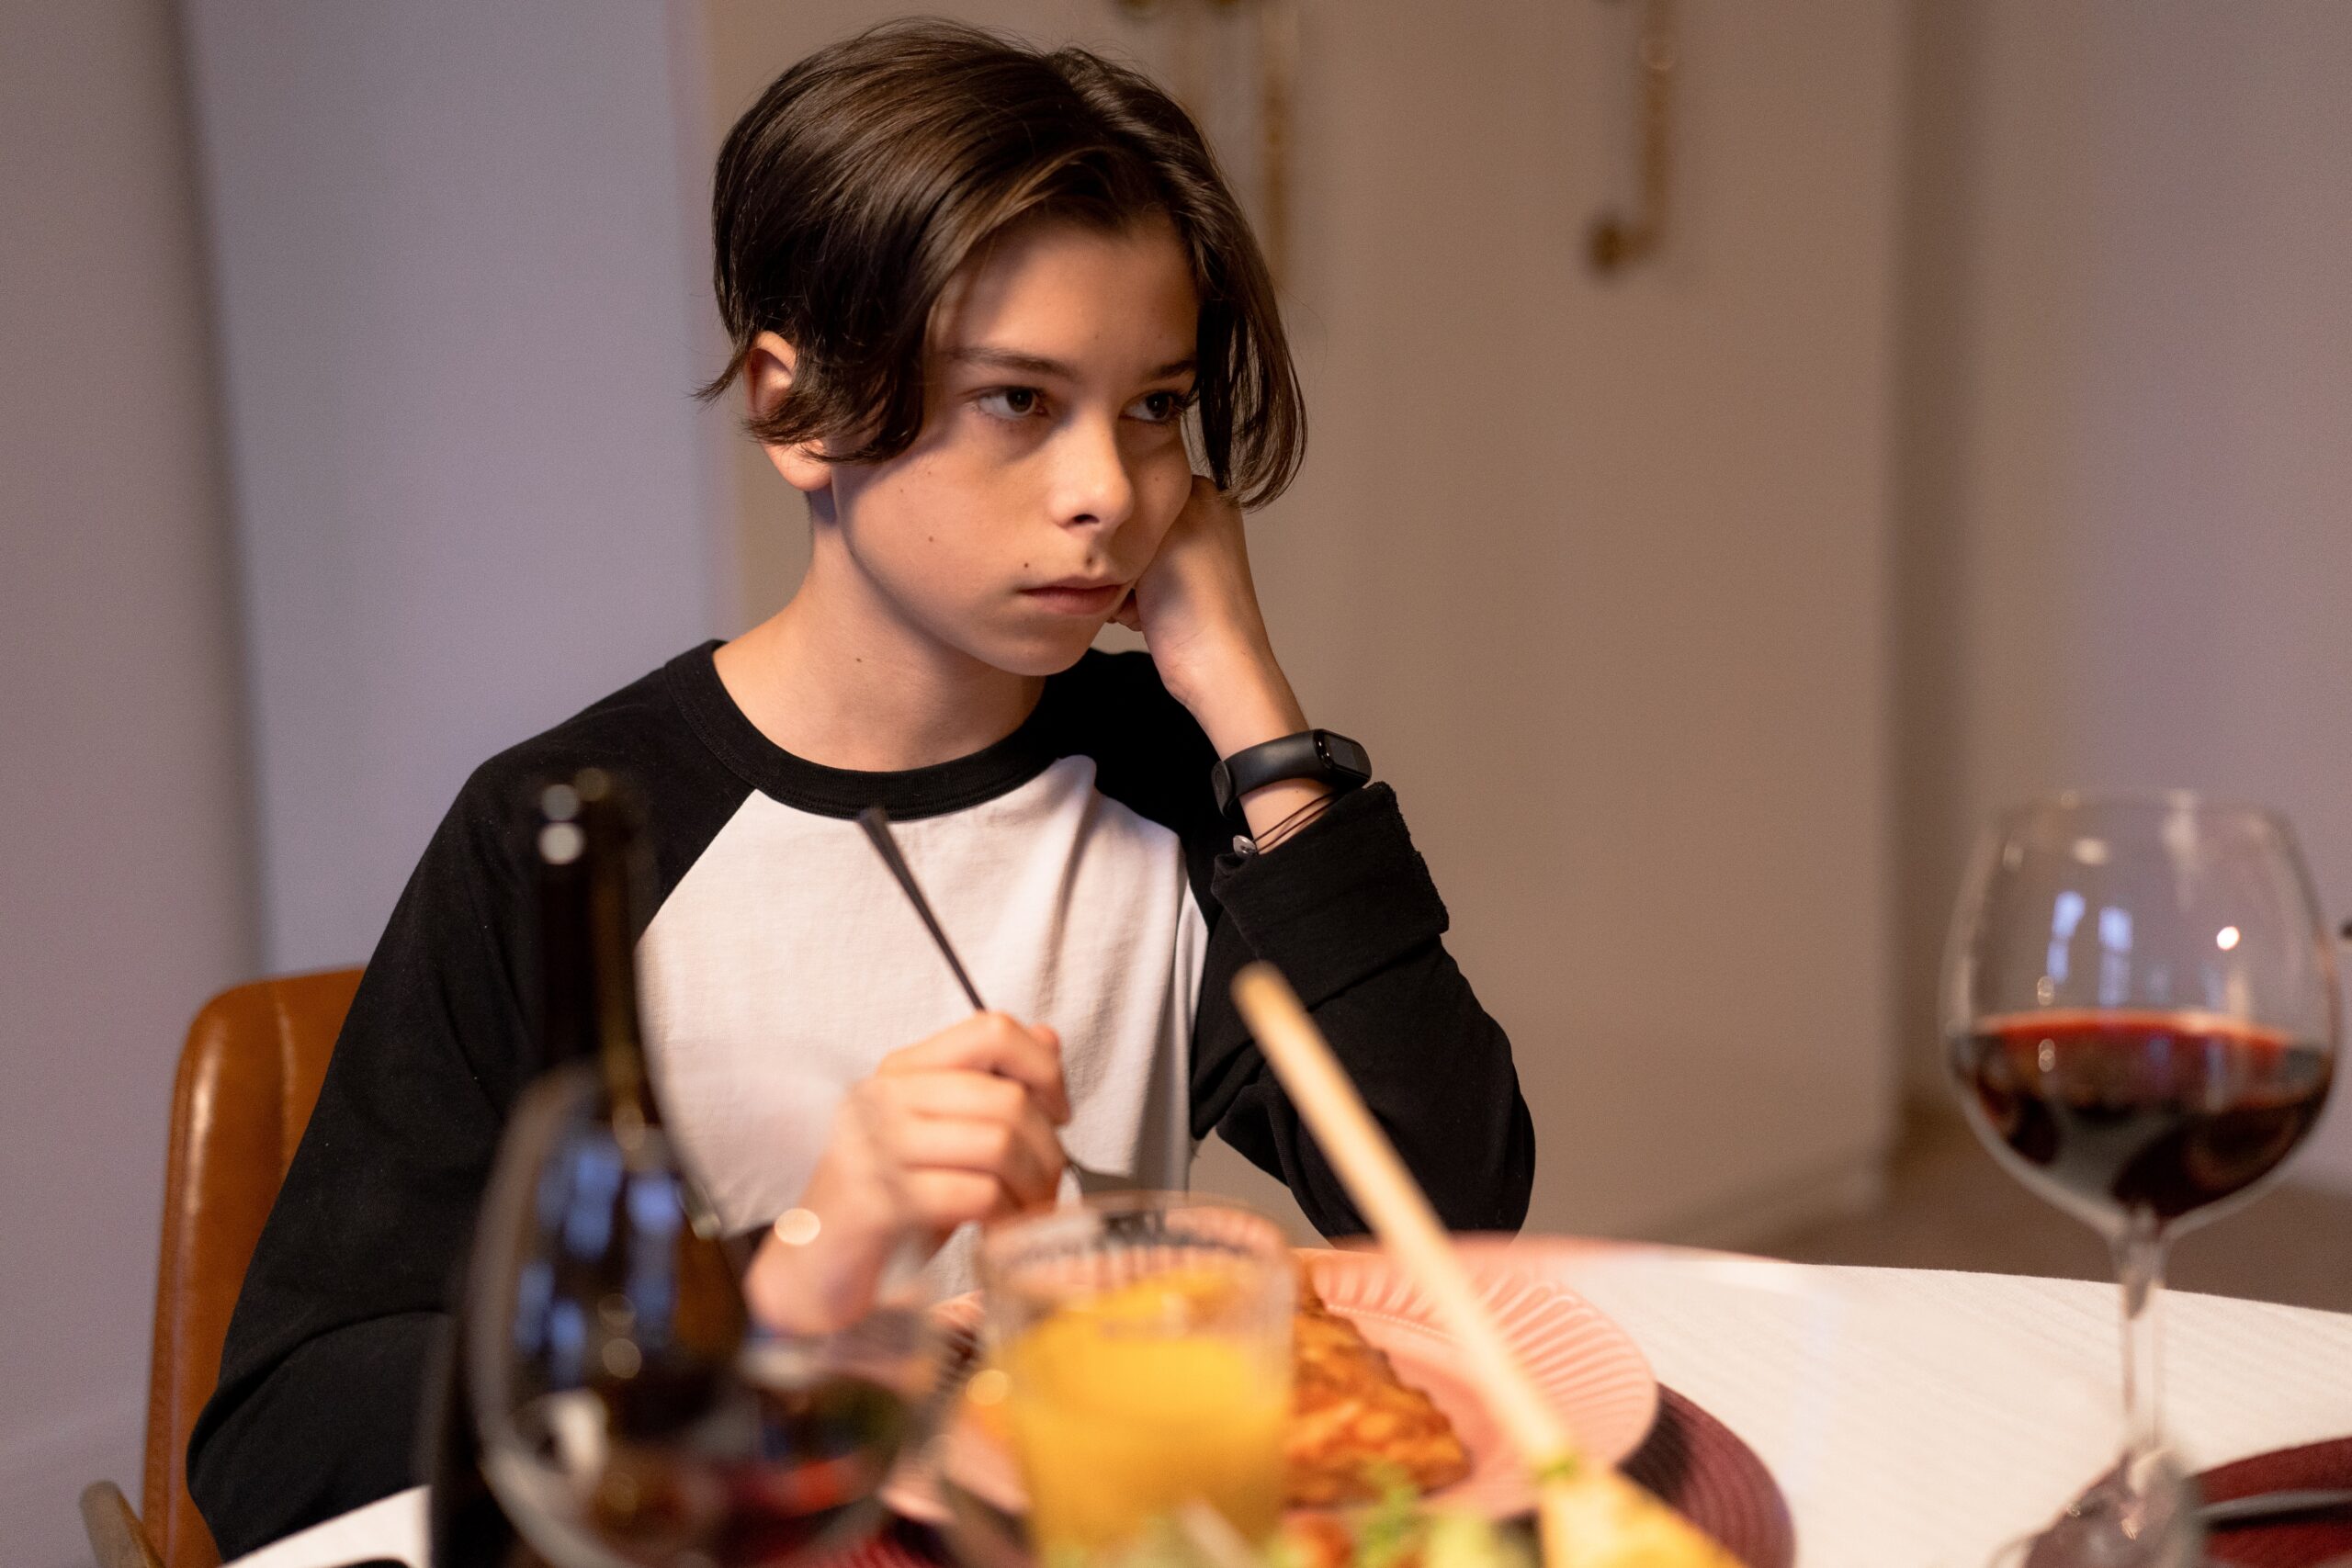 A young boy sits unhappily at the dinner table, feeling disconnected from his parents.